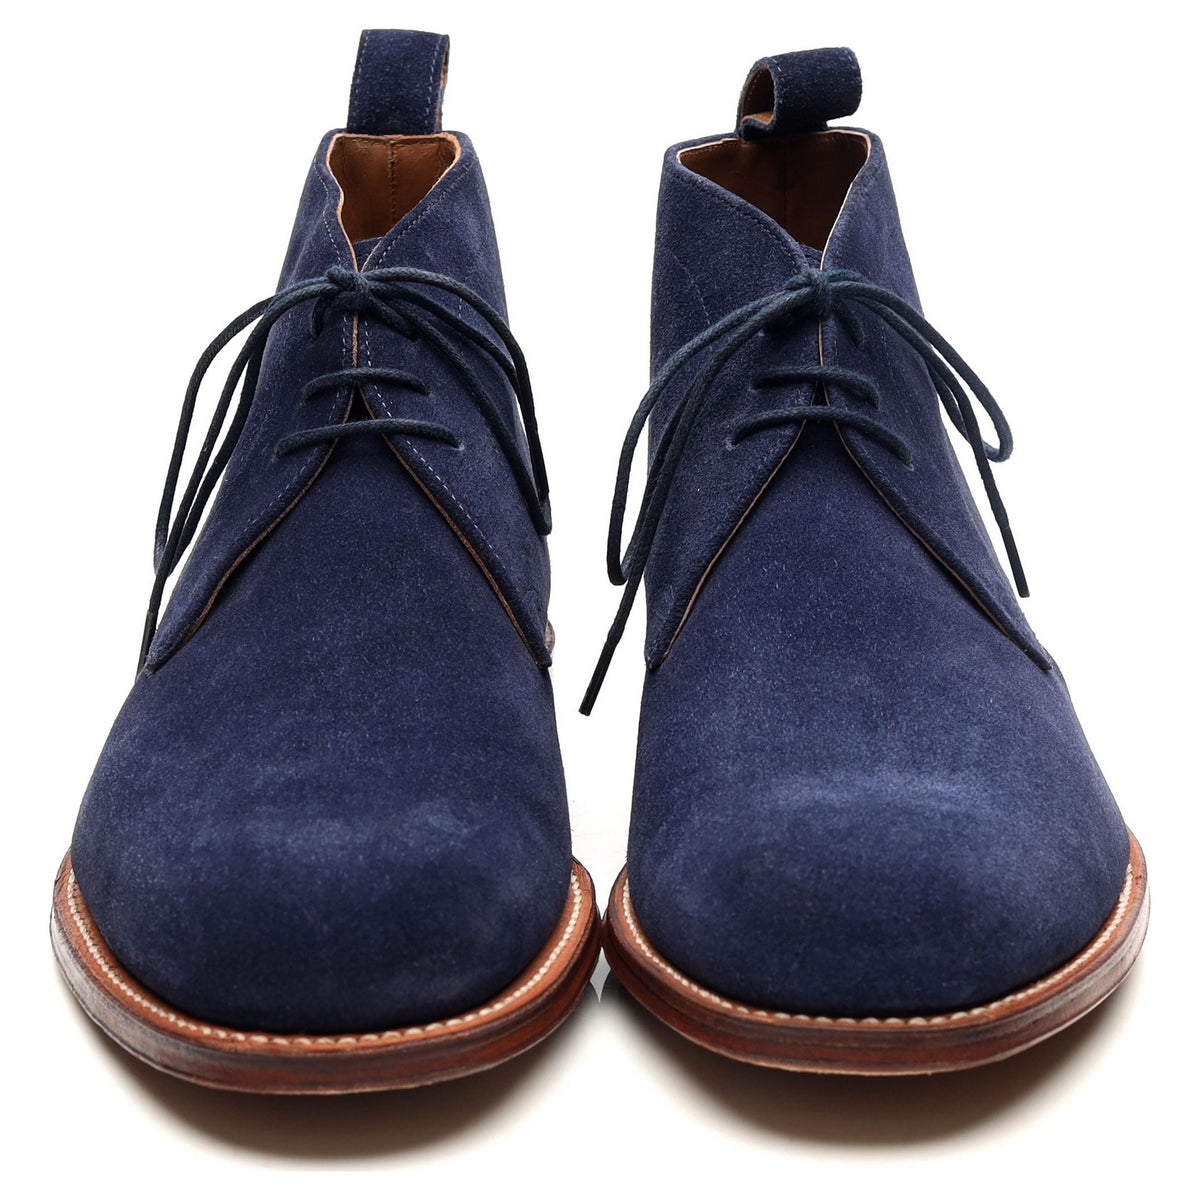 &#39;Marcus&#39; Blue Suede Chukka Boots UK 7.5 F